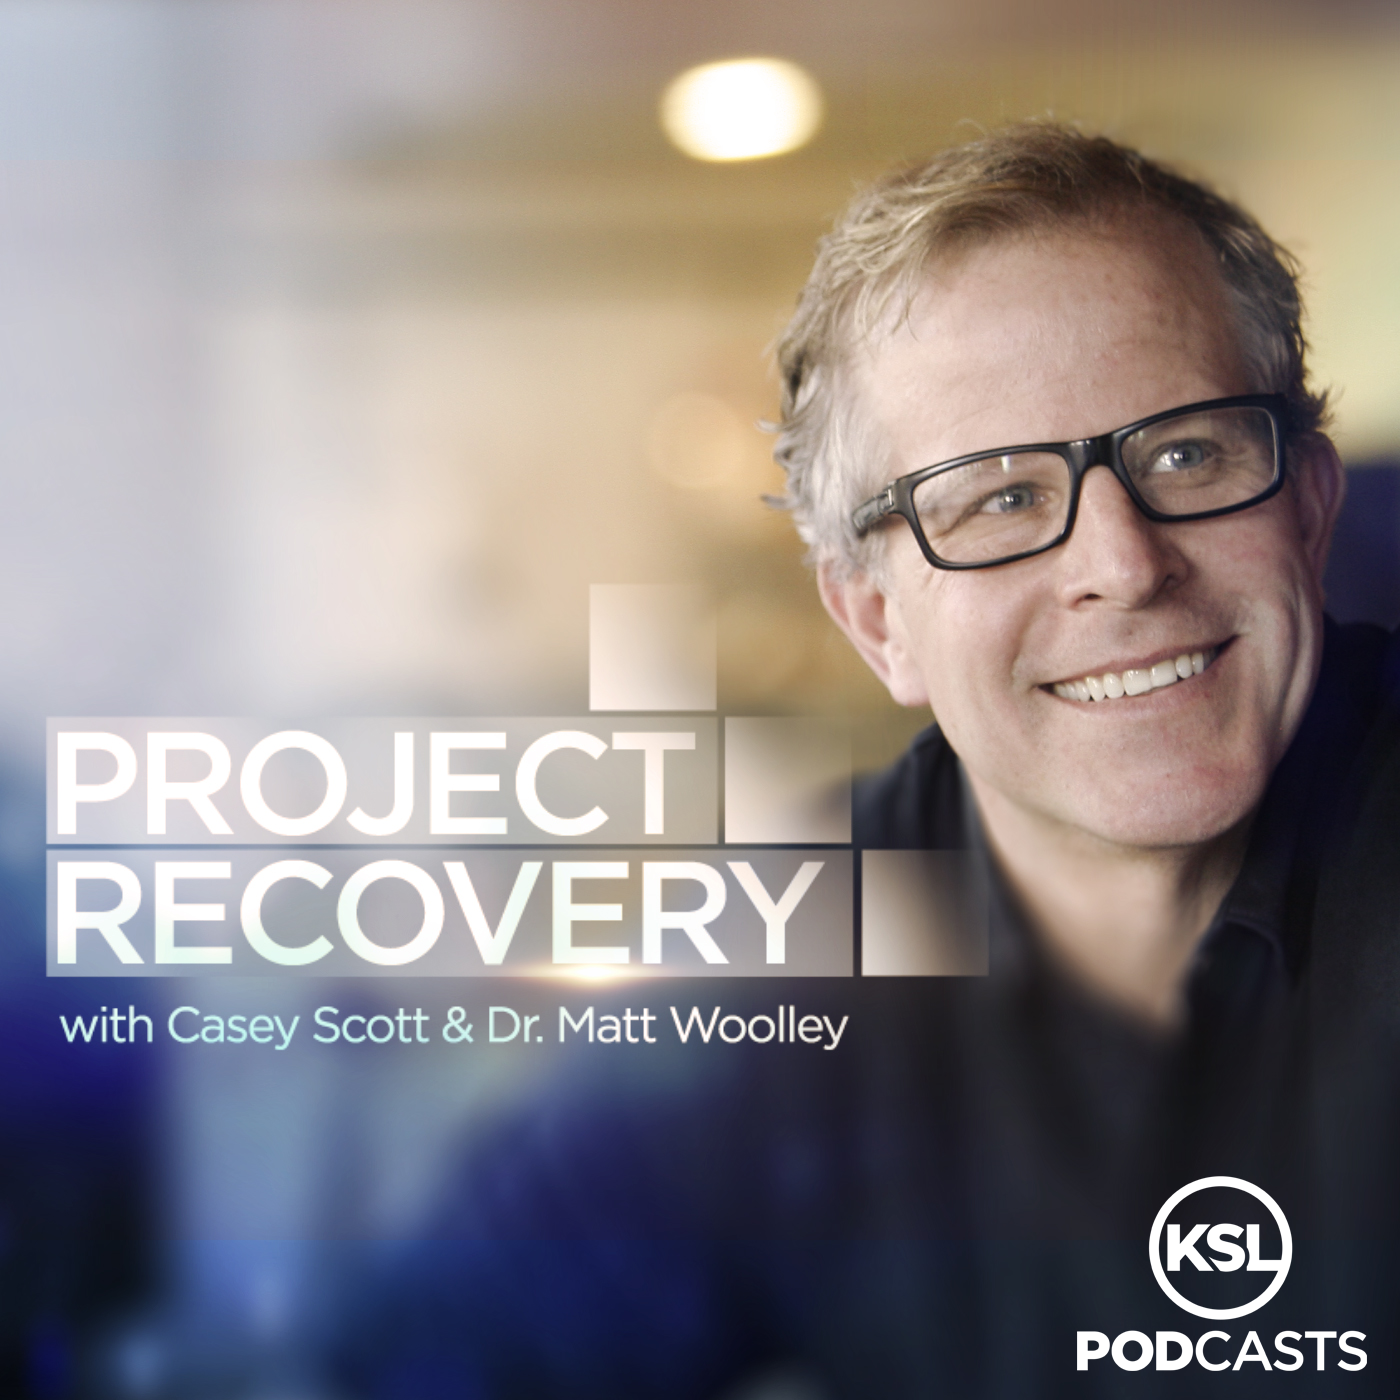 Corey Markisich and Ryan Decker share their recovery journeys and their work at Wasatch Recovery